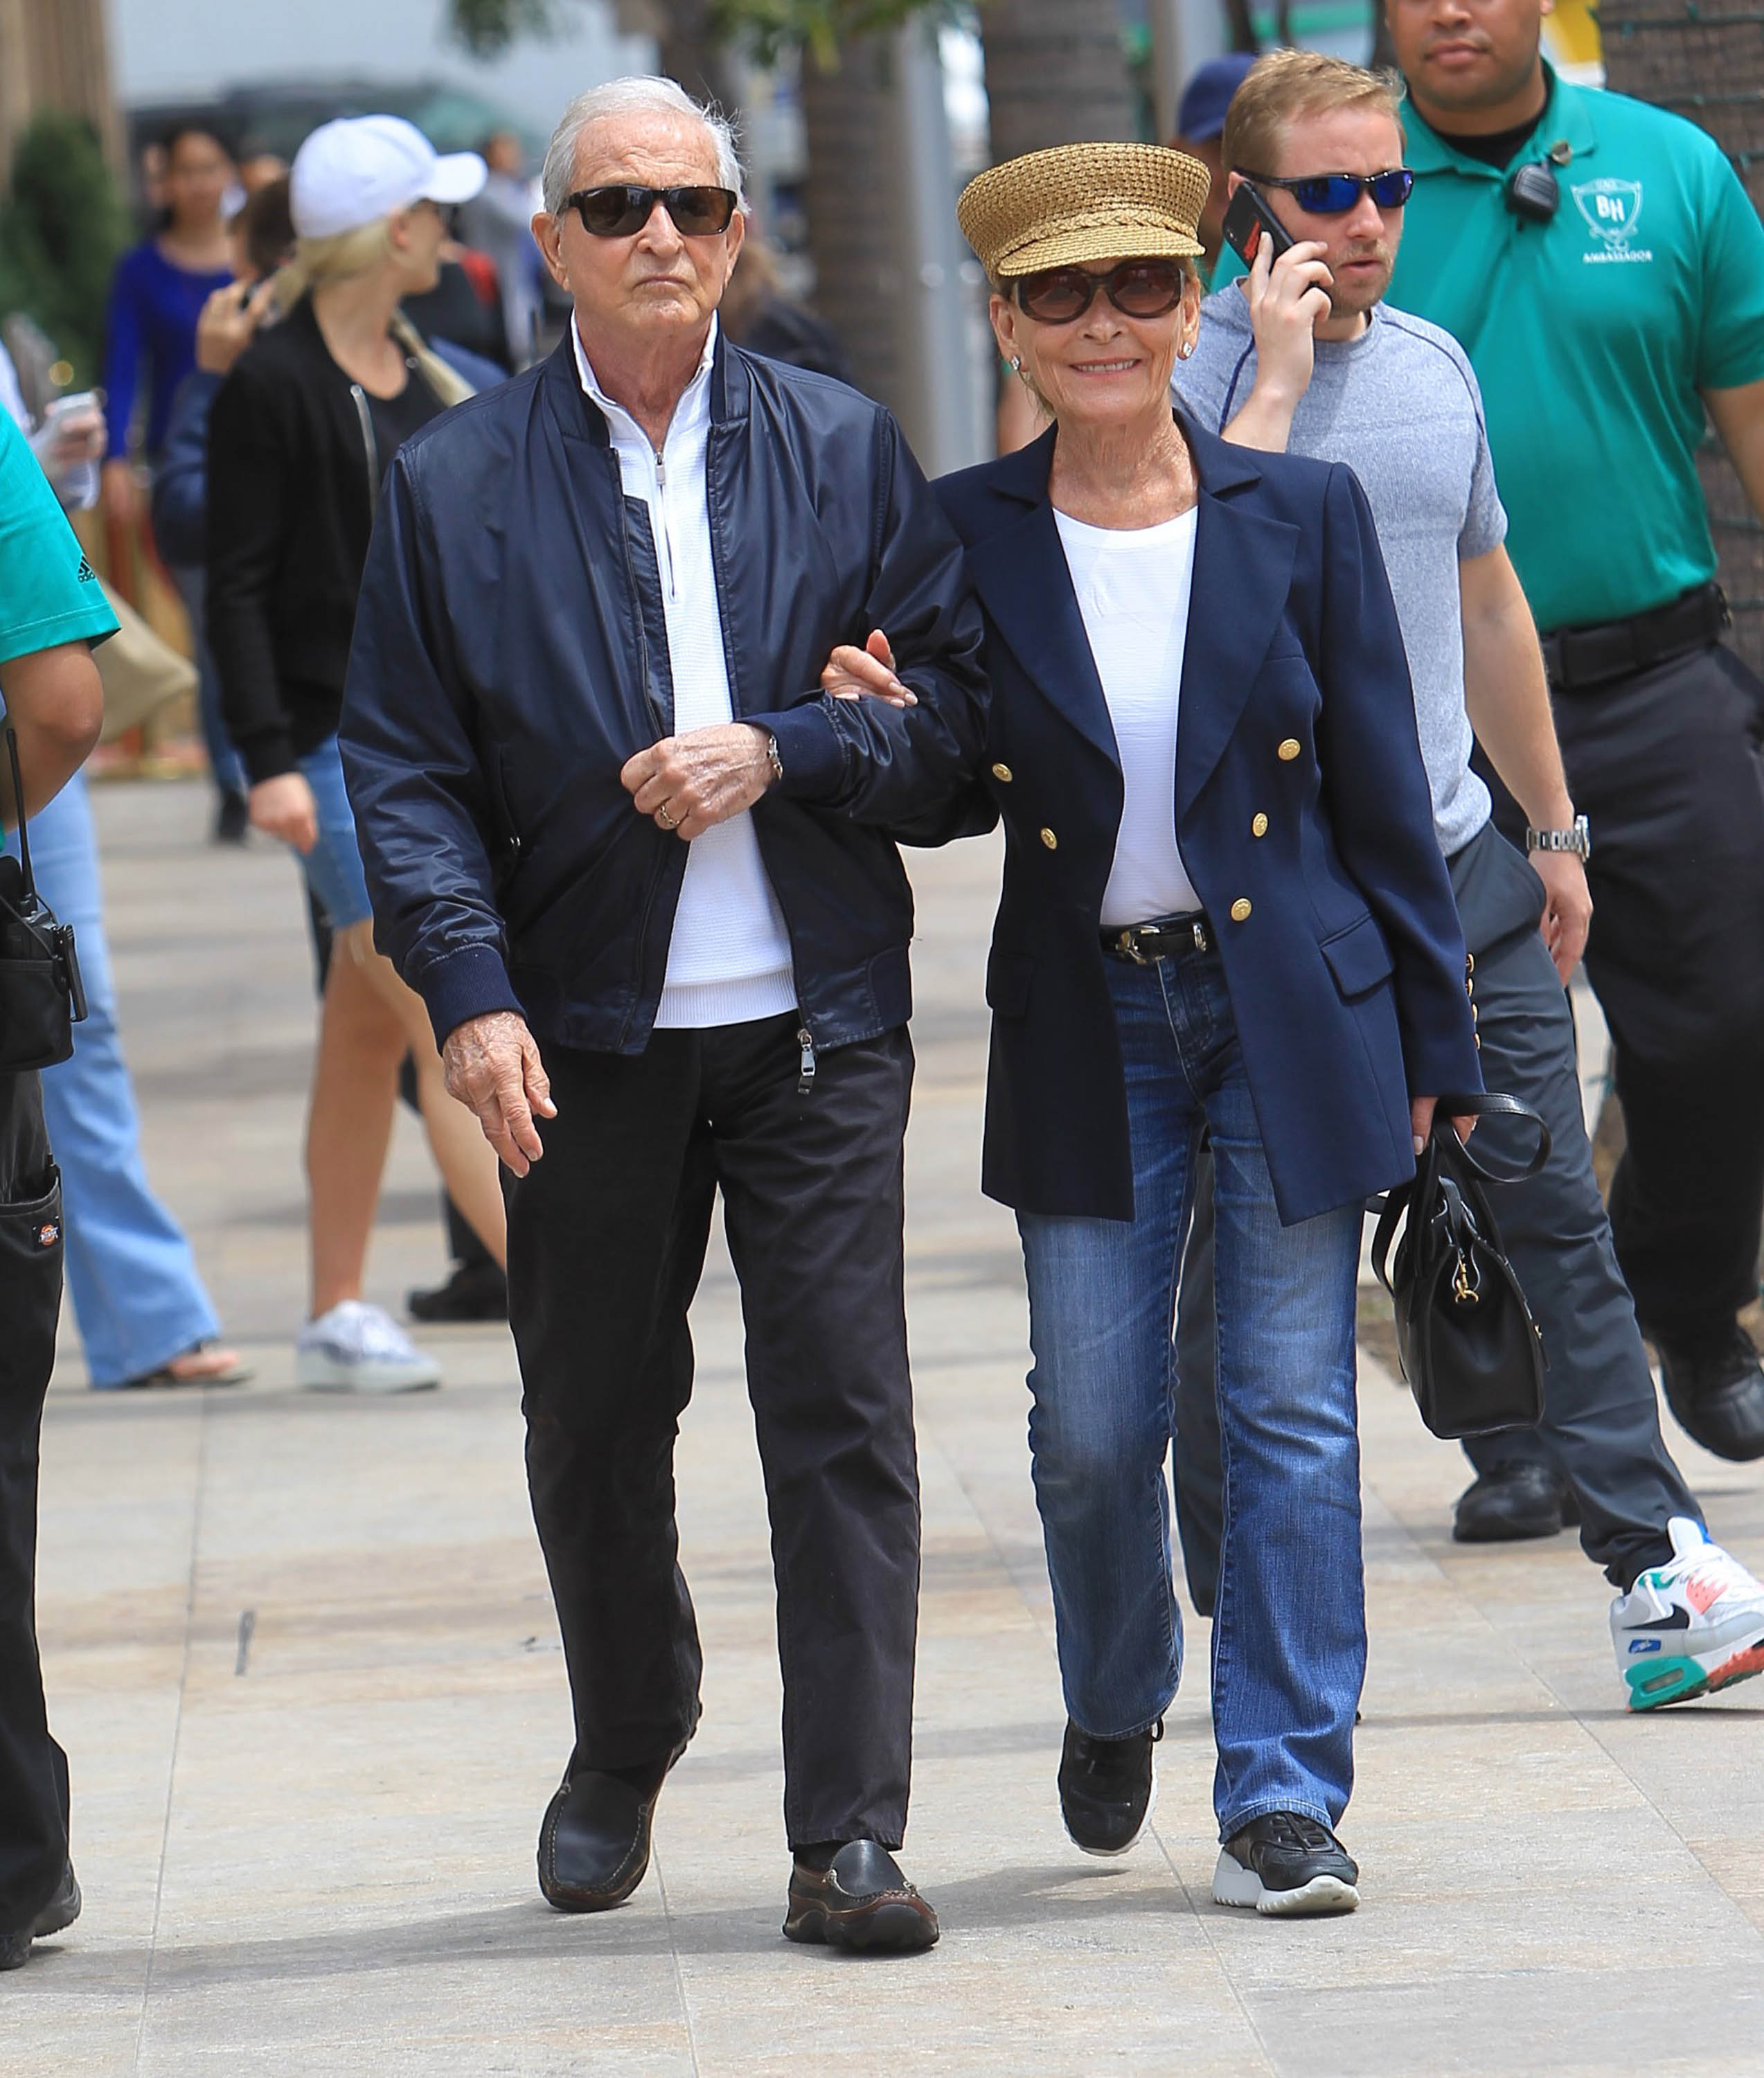 Judge Judy Remarried Her Husband Because She ‘Missed’ Him – They Found ...